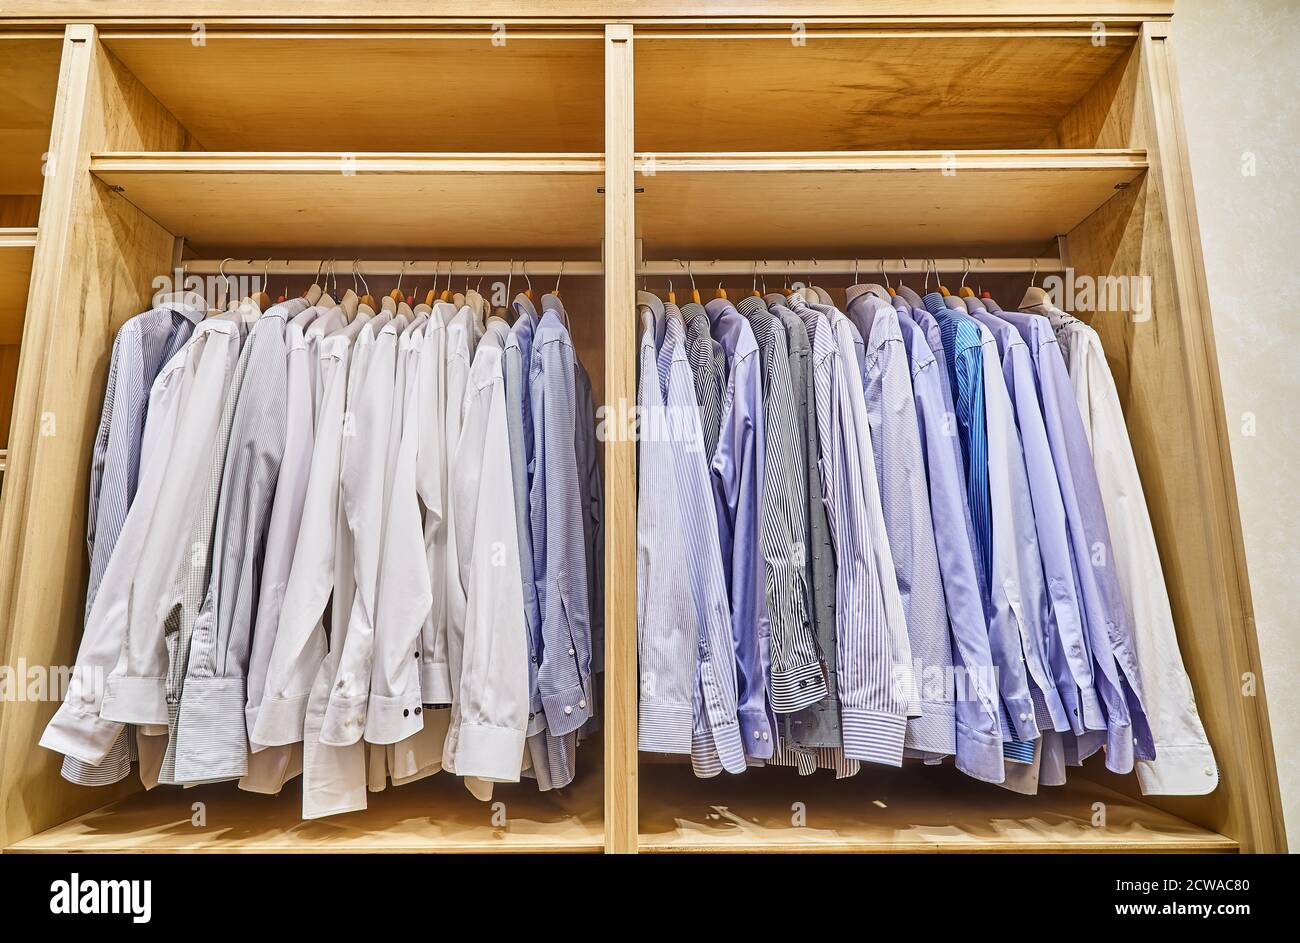 Men's shirts are hanging in the wooden closet dressing room. Wooden  wardrobe Stock Photo - Alamy